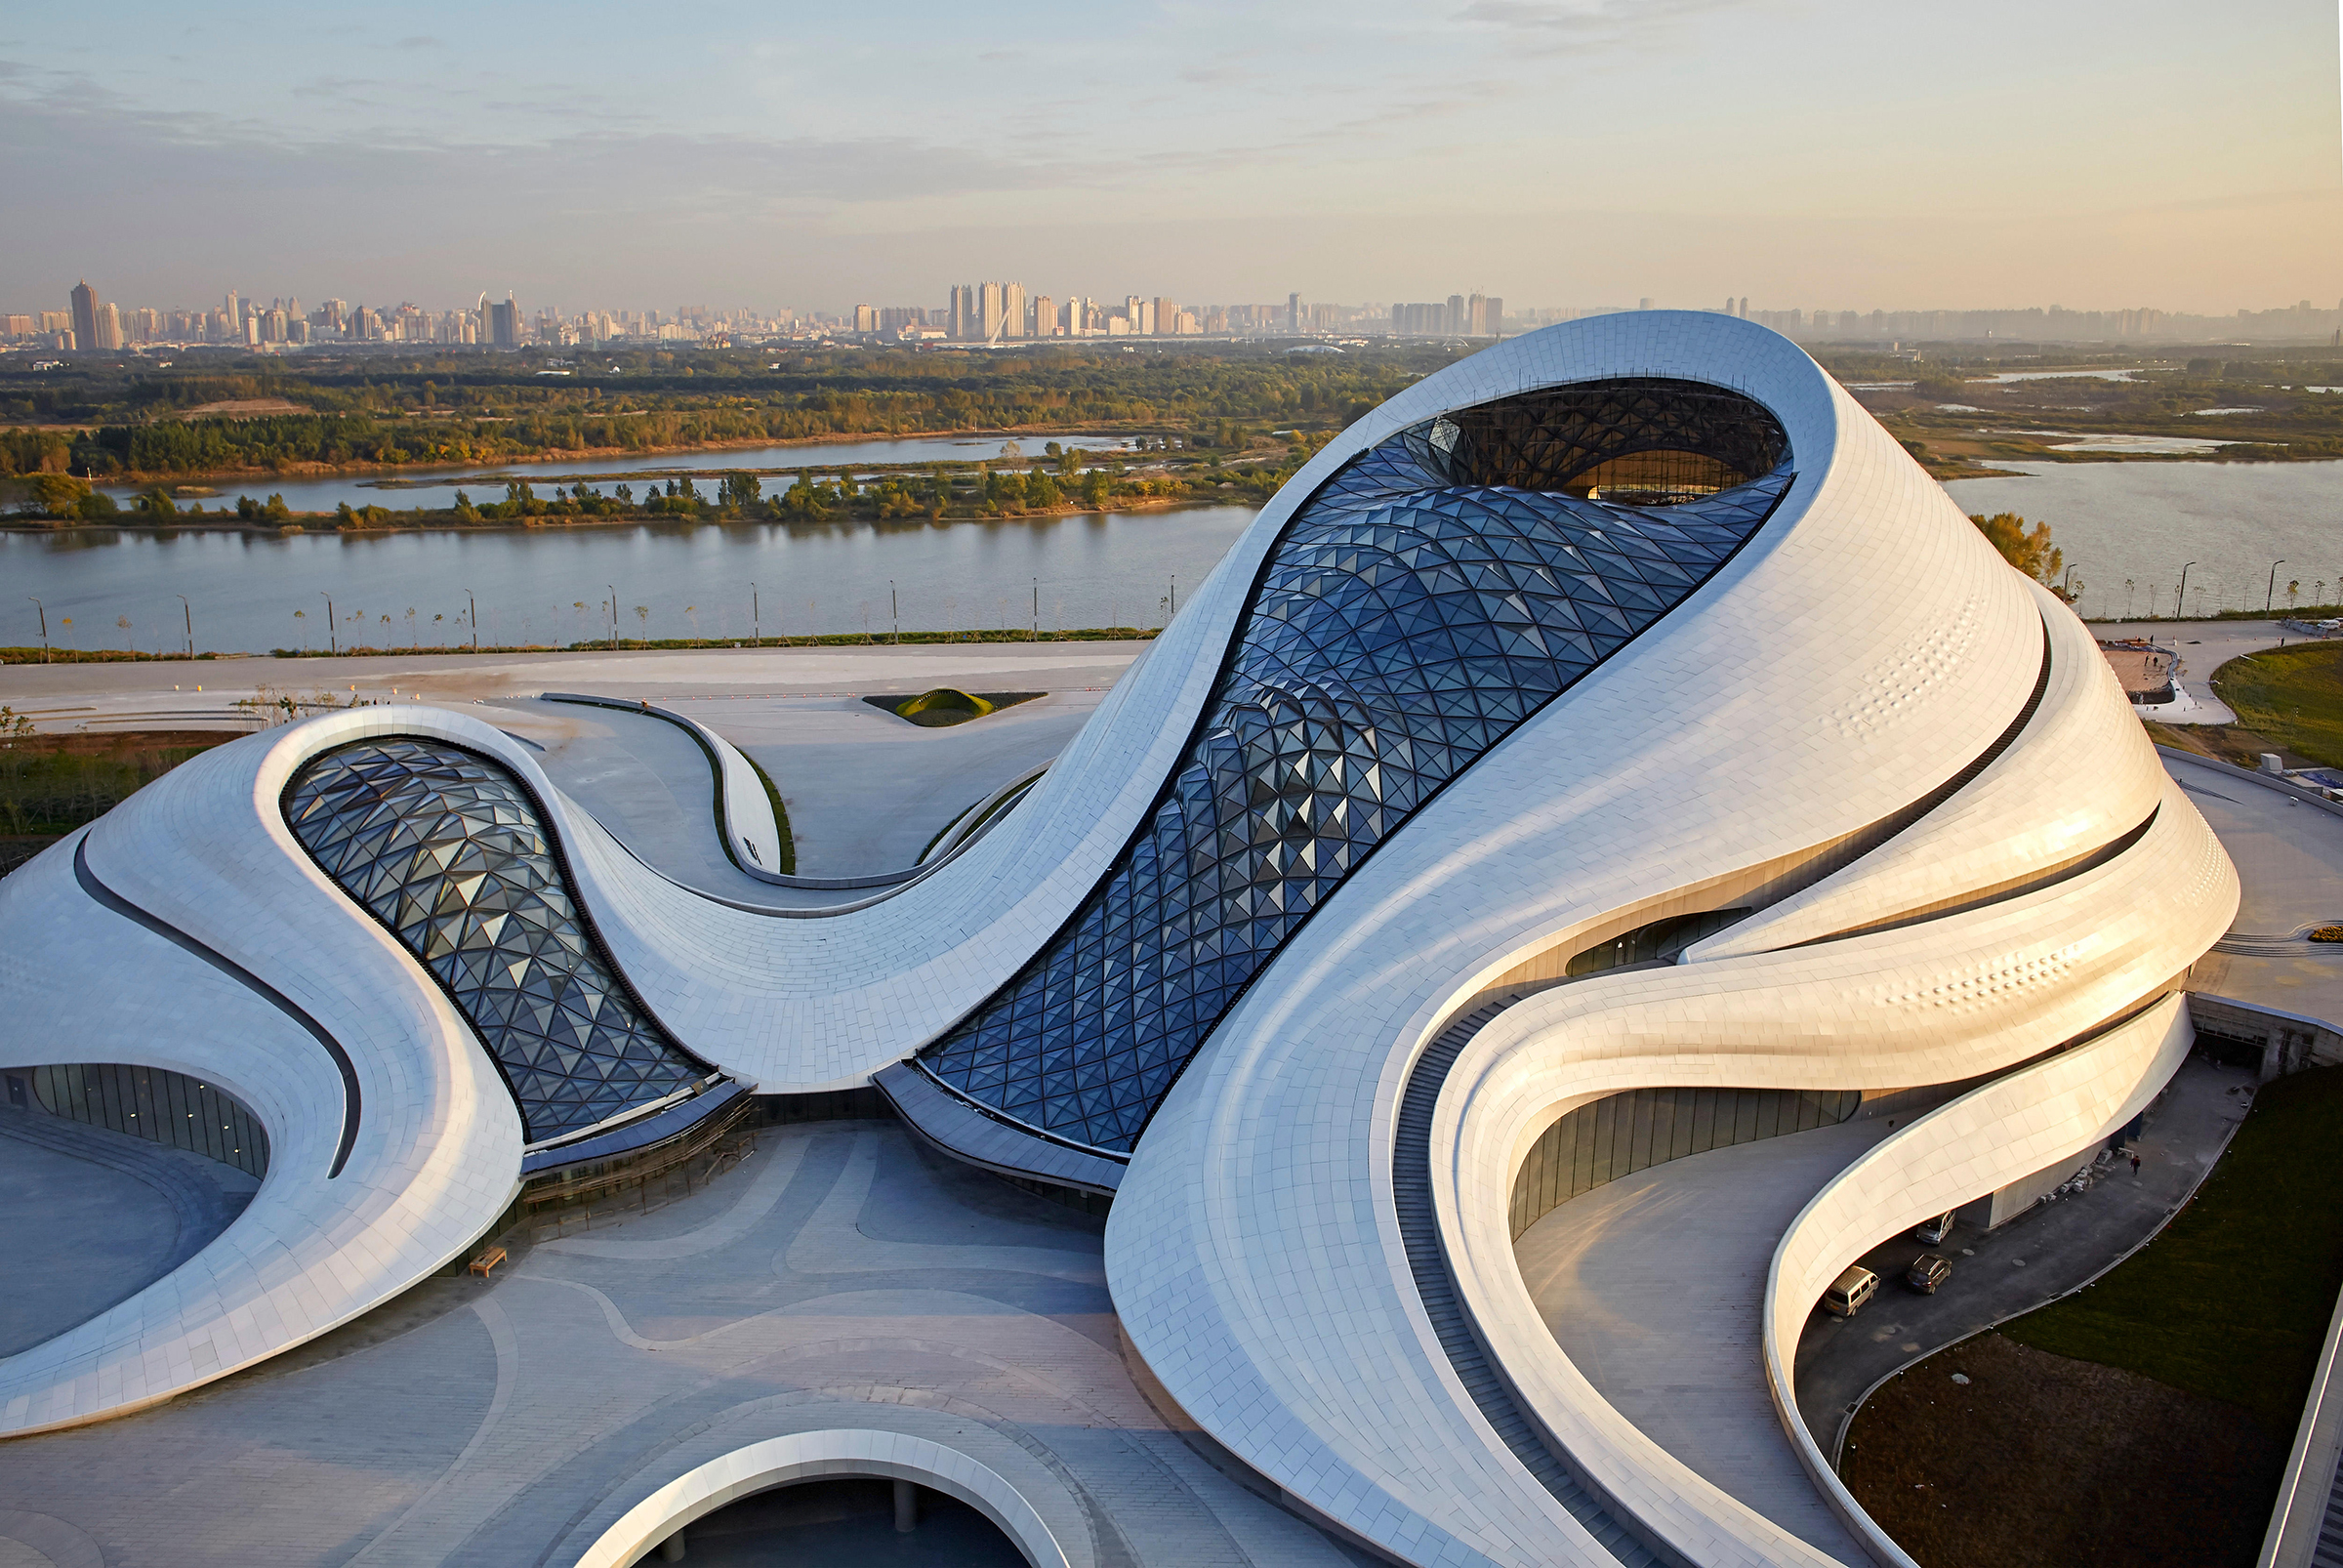 Aerial view of opera house embedded in Harbins wetland landscape Harbin Opera House Harbin China Architect MAD Architects